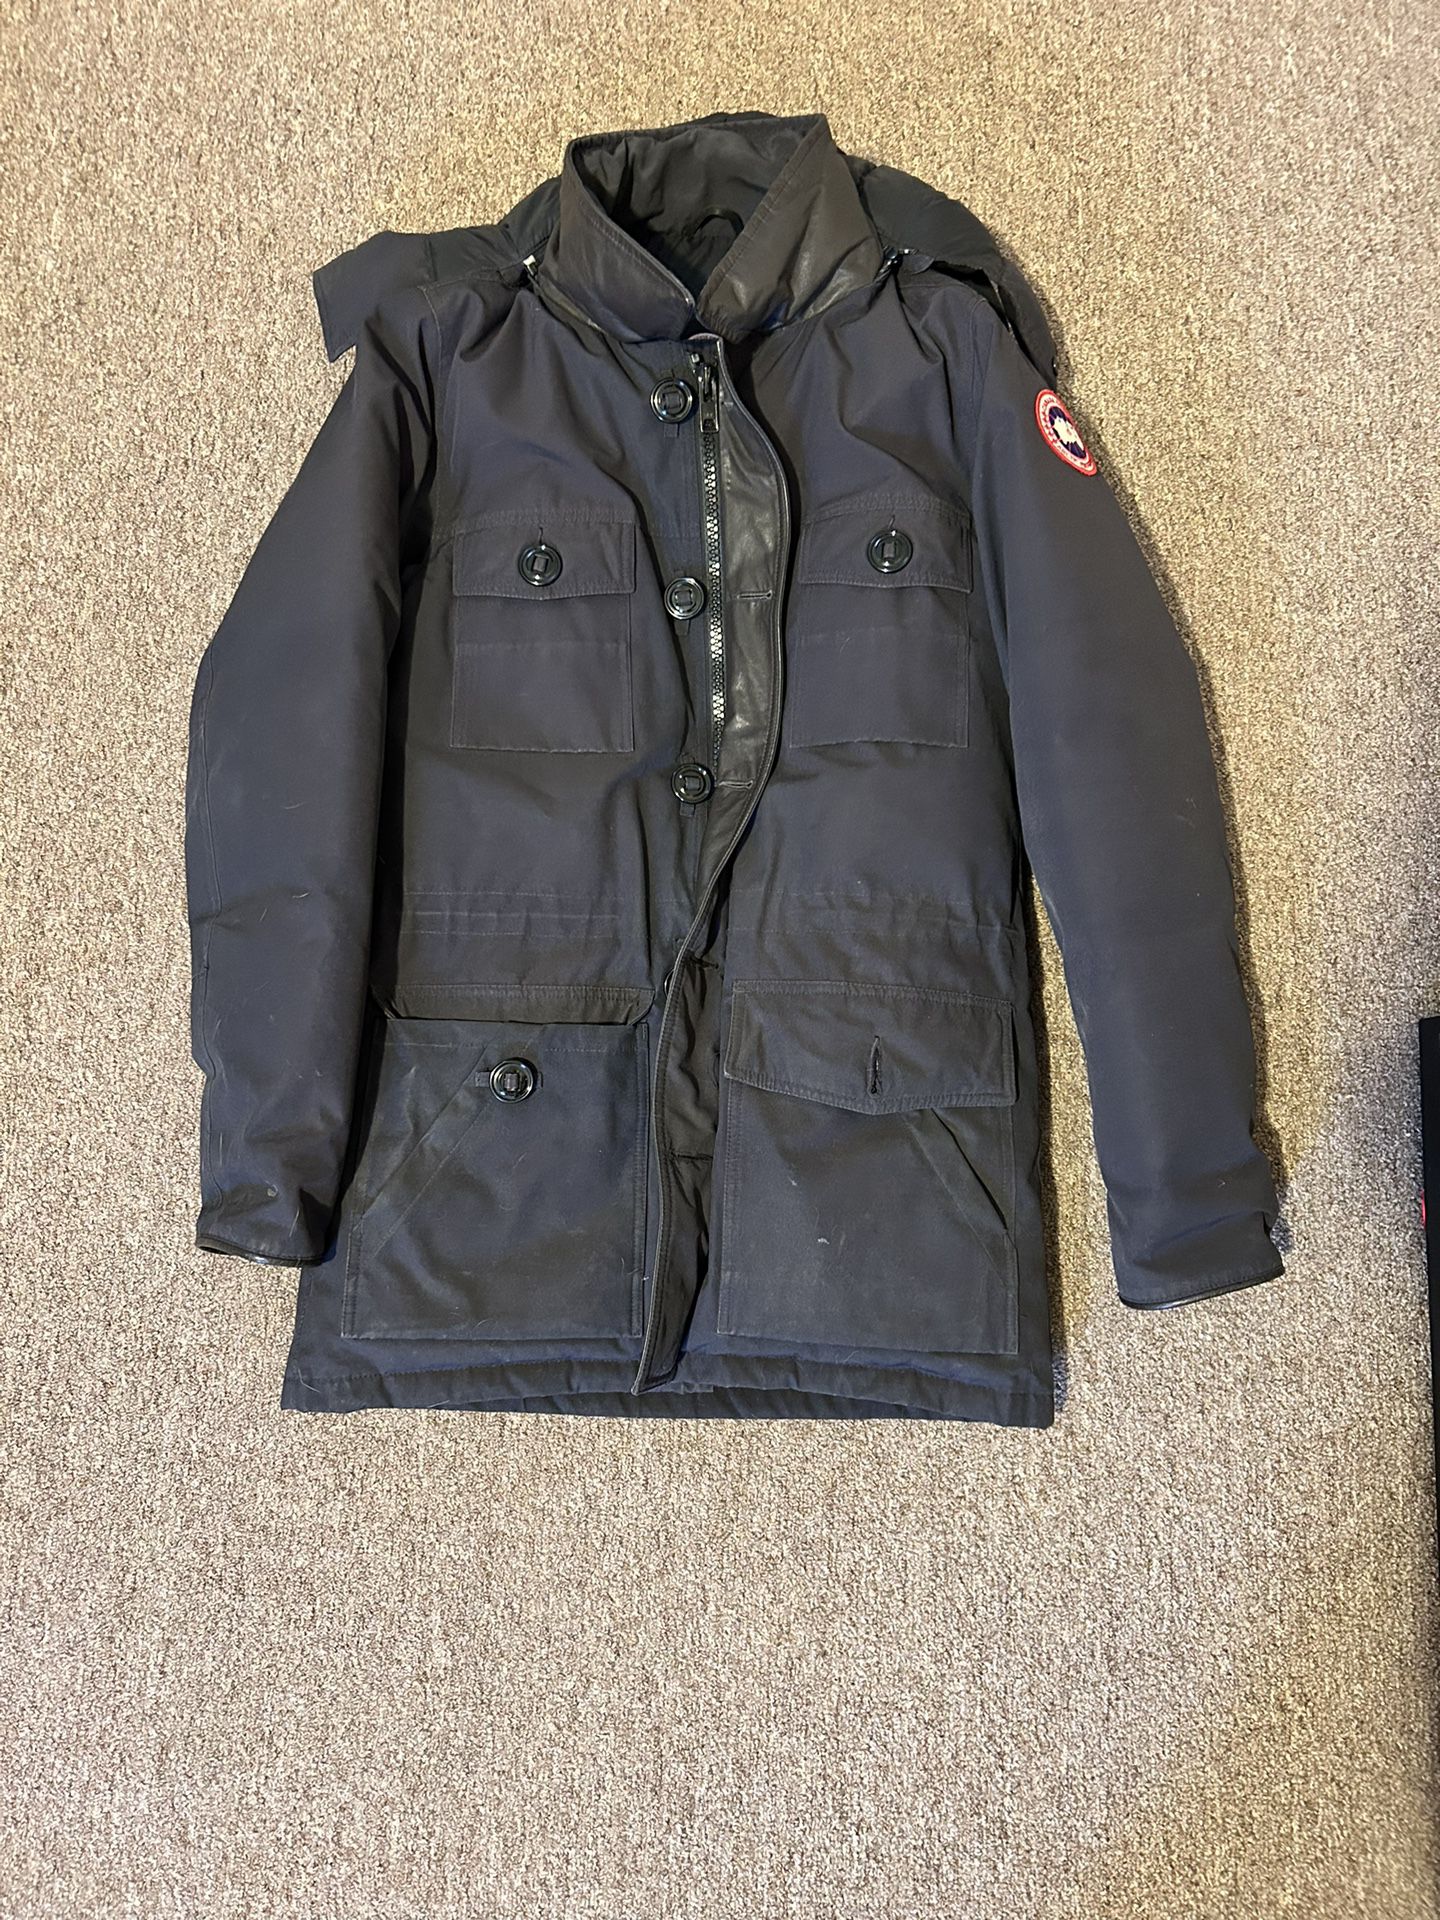 Canada Goose Parka $450 Color: Black Size:Small Adult 